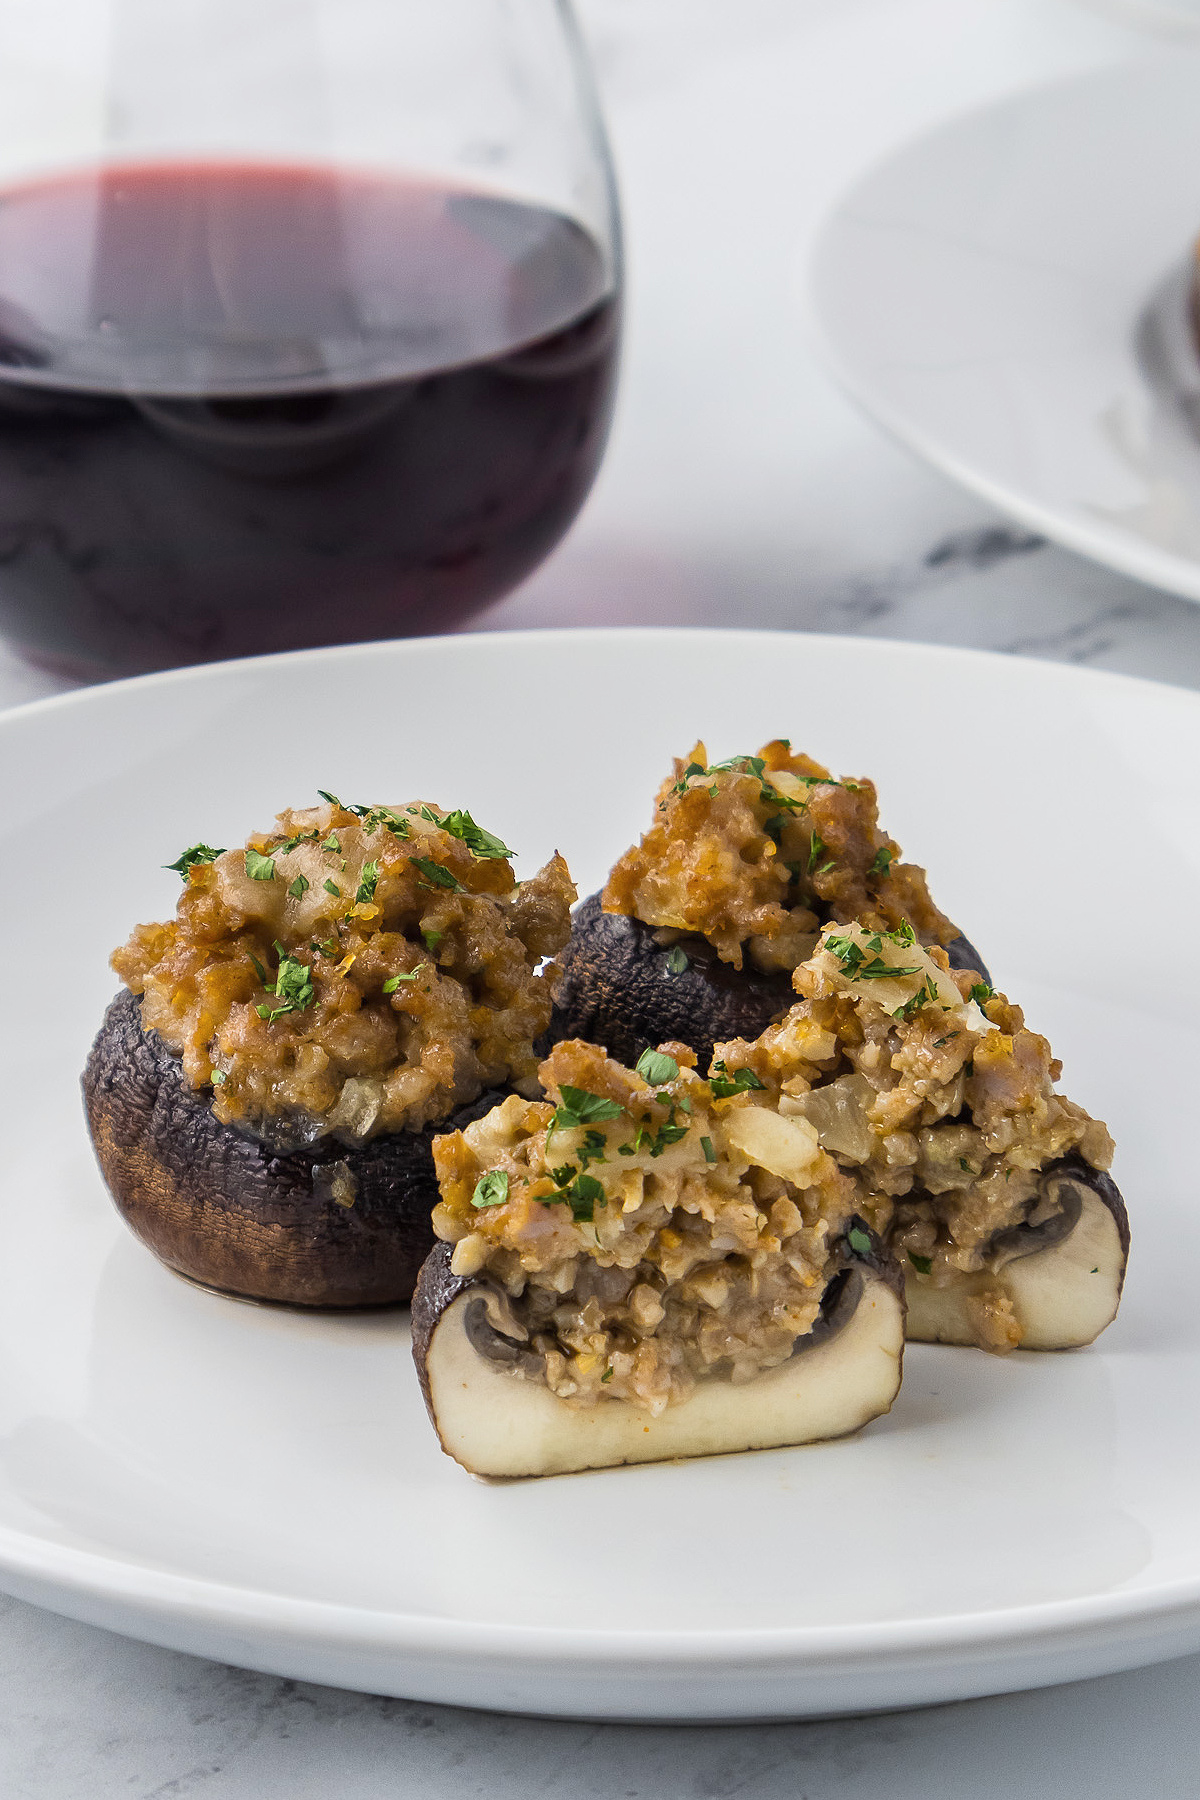 Stuffed mushrooms on a plate next to a glass of wine.